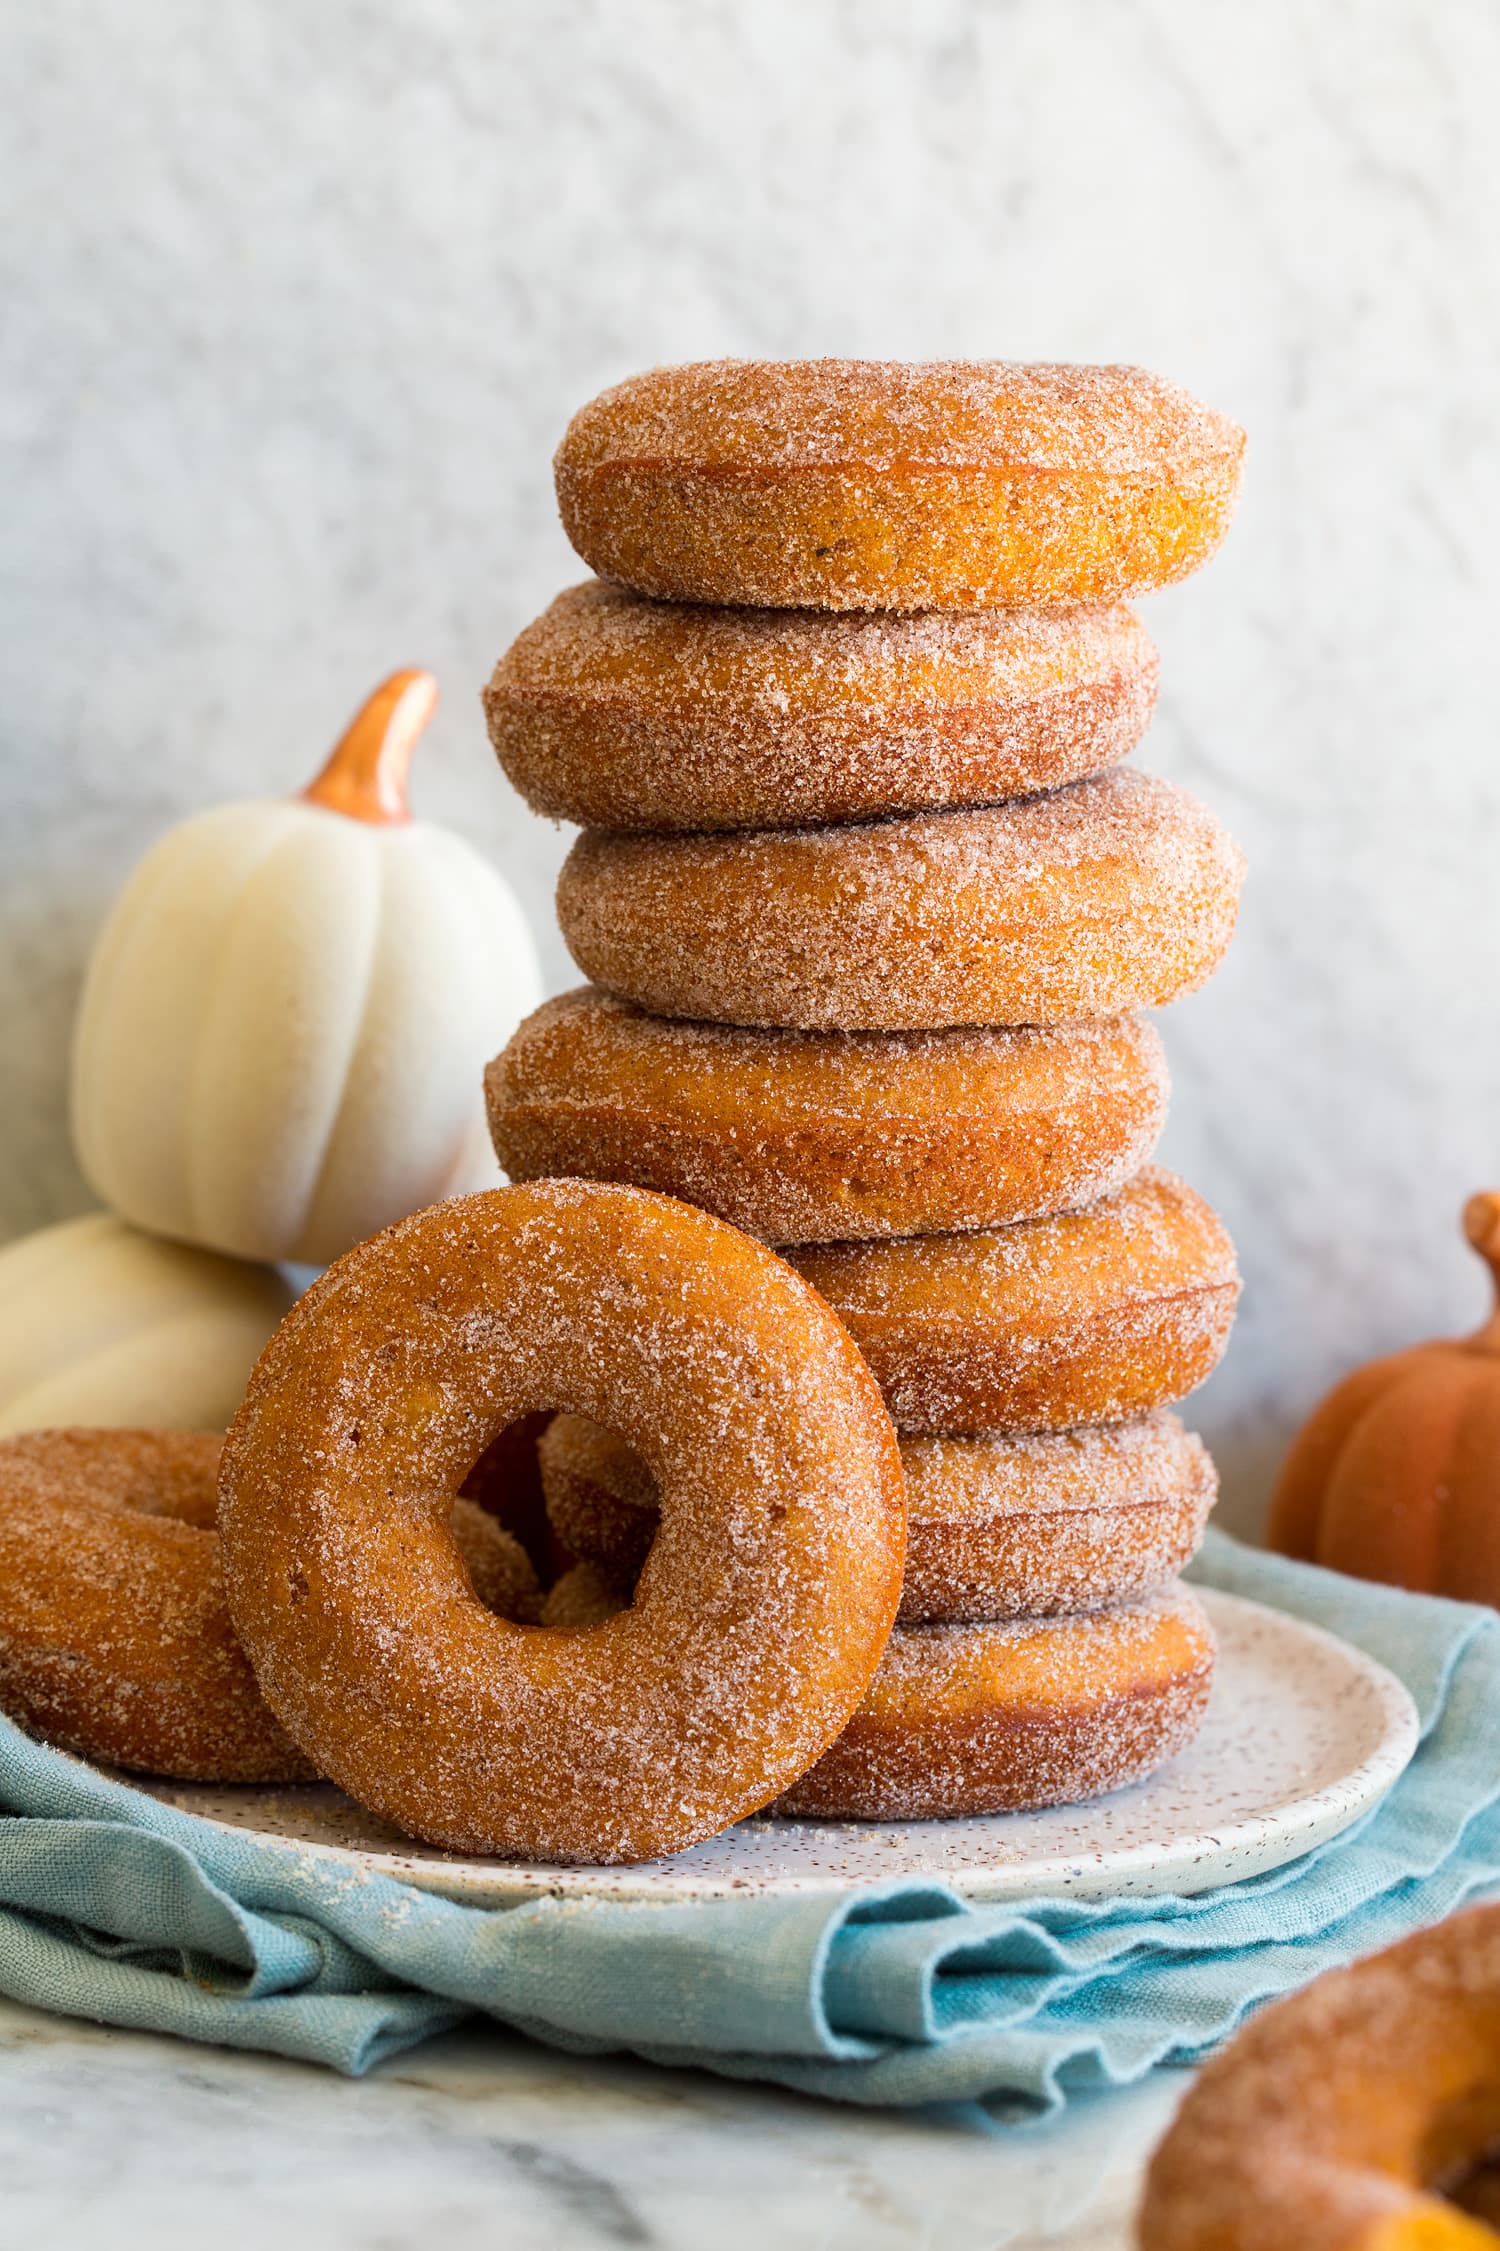 Stack of homemade baked pumpkin donuts covered in cinnamon sugar.